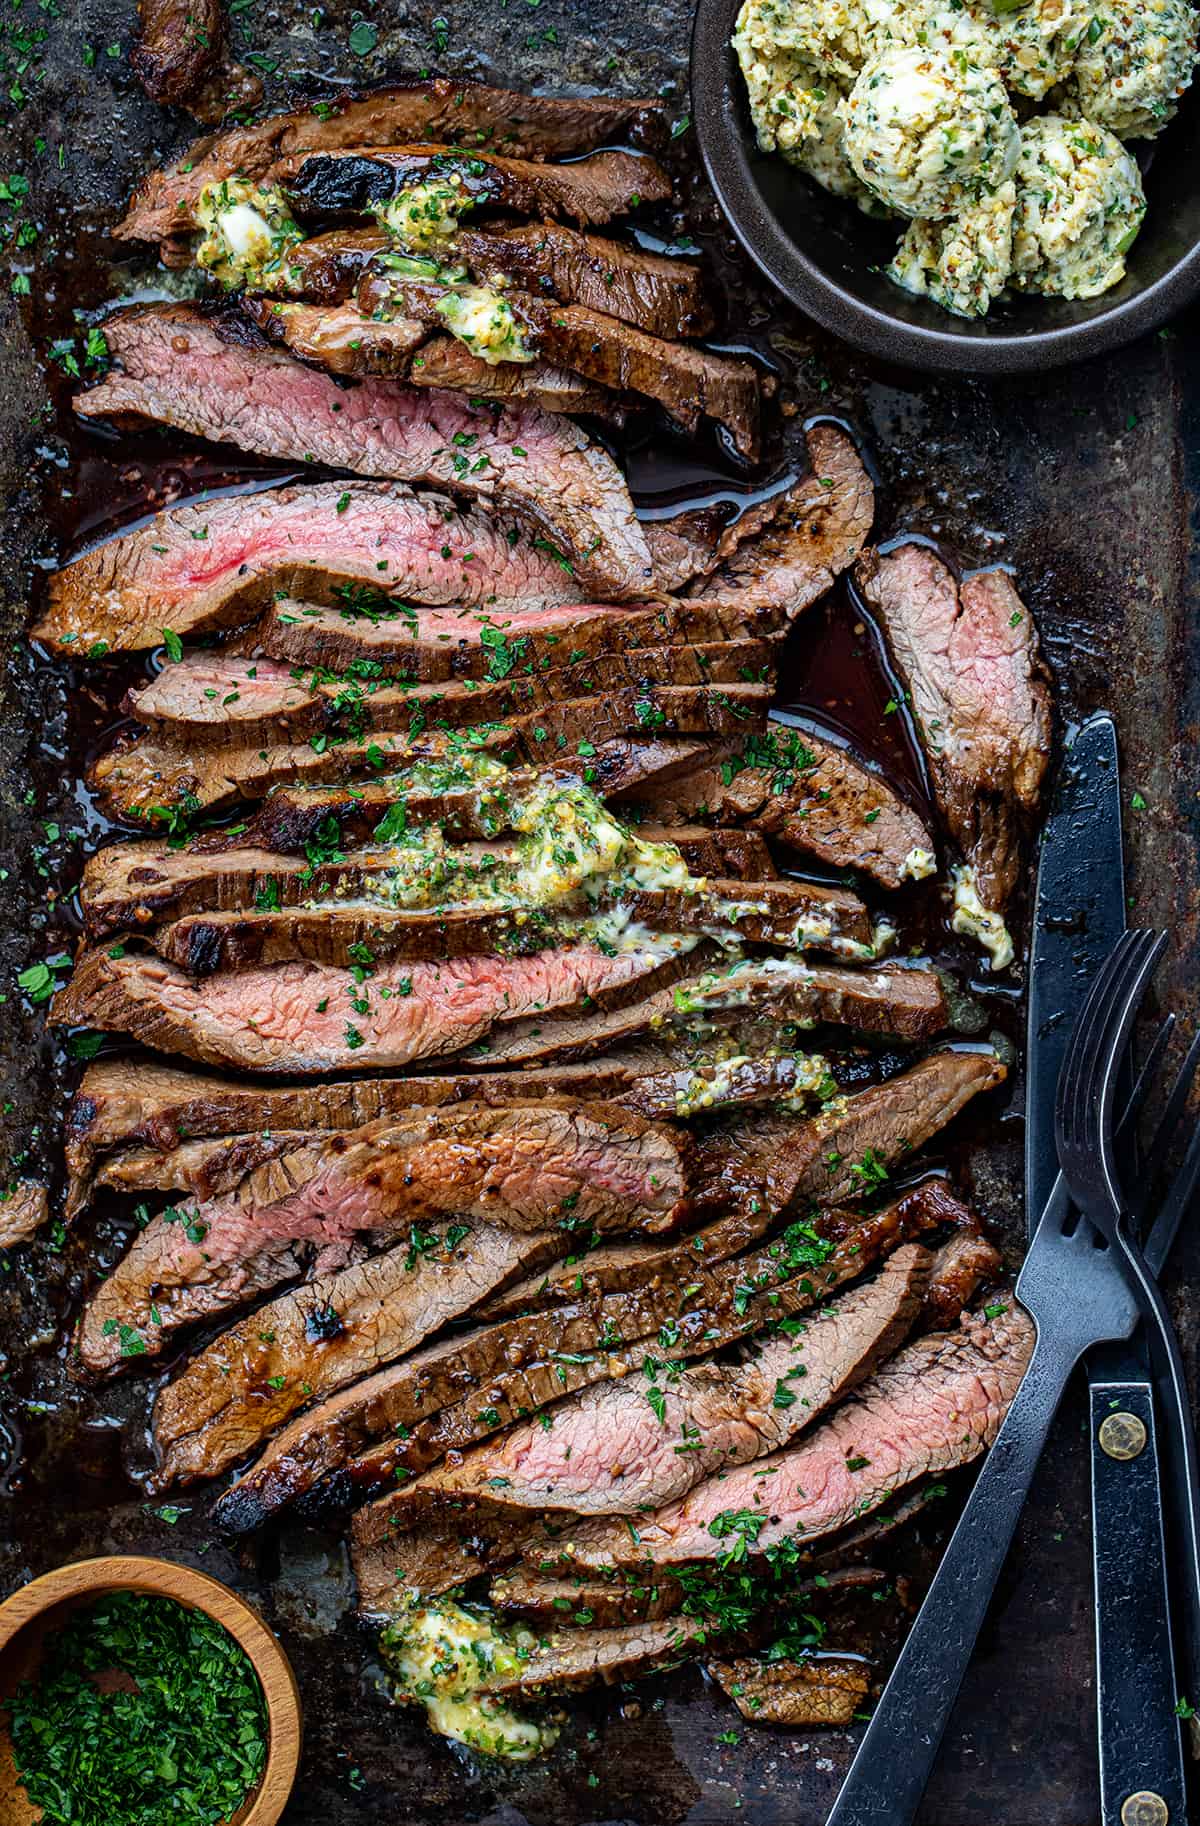 Cut up London Broil on a Sheet Pan with Melted Cowboy Butter and Silverware.